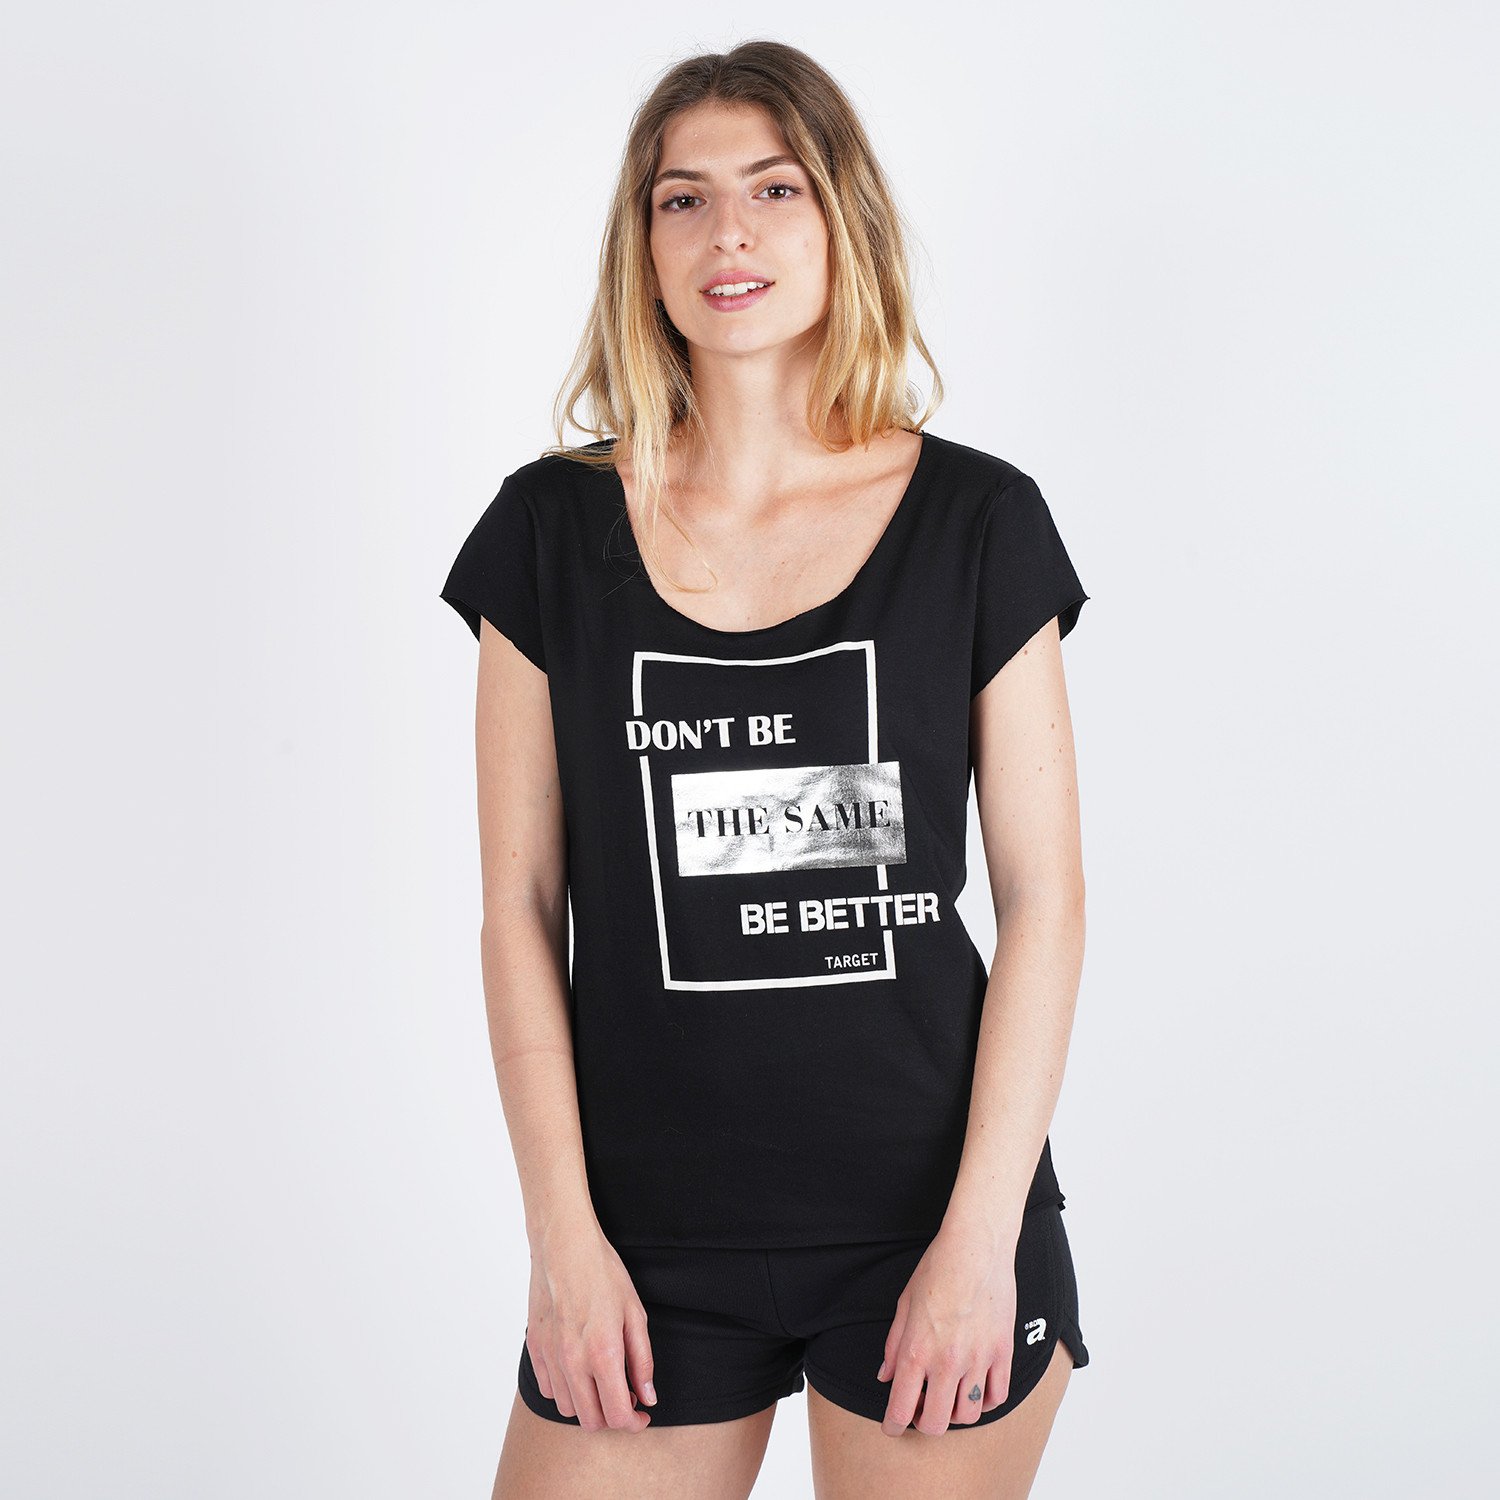 Target Women's Loose Top Καλτσα 1/30 "don΄τ Be The Shame" (9000053647_001)